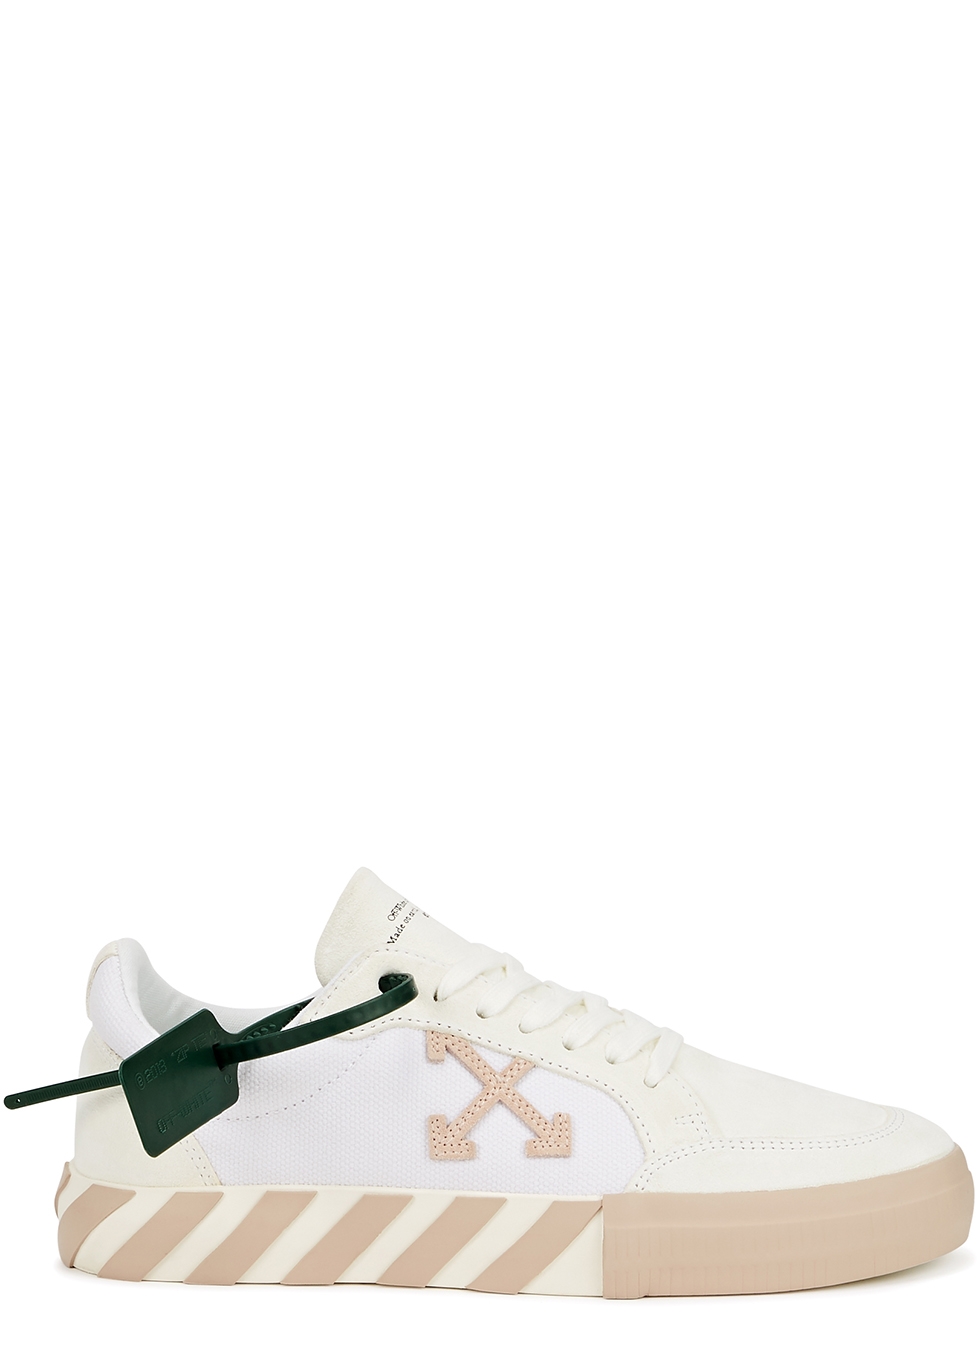 Vulcanized white canvas sneakers